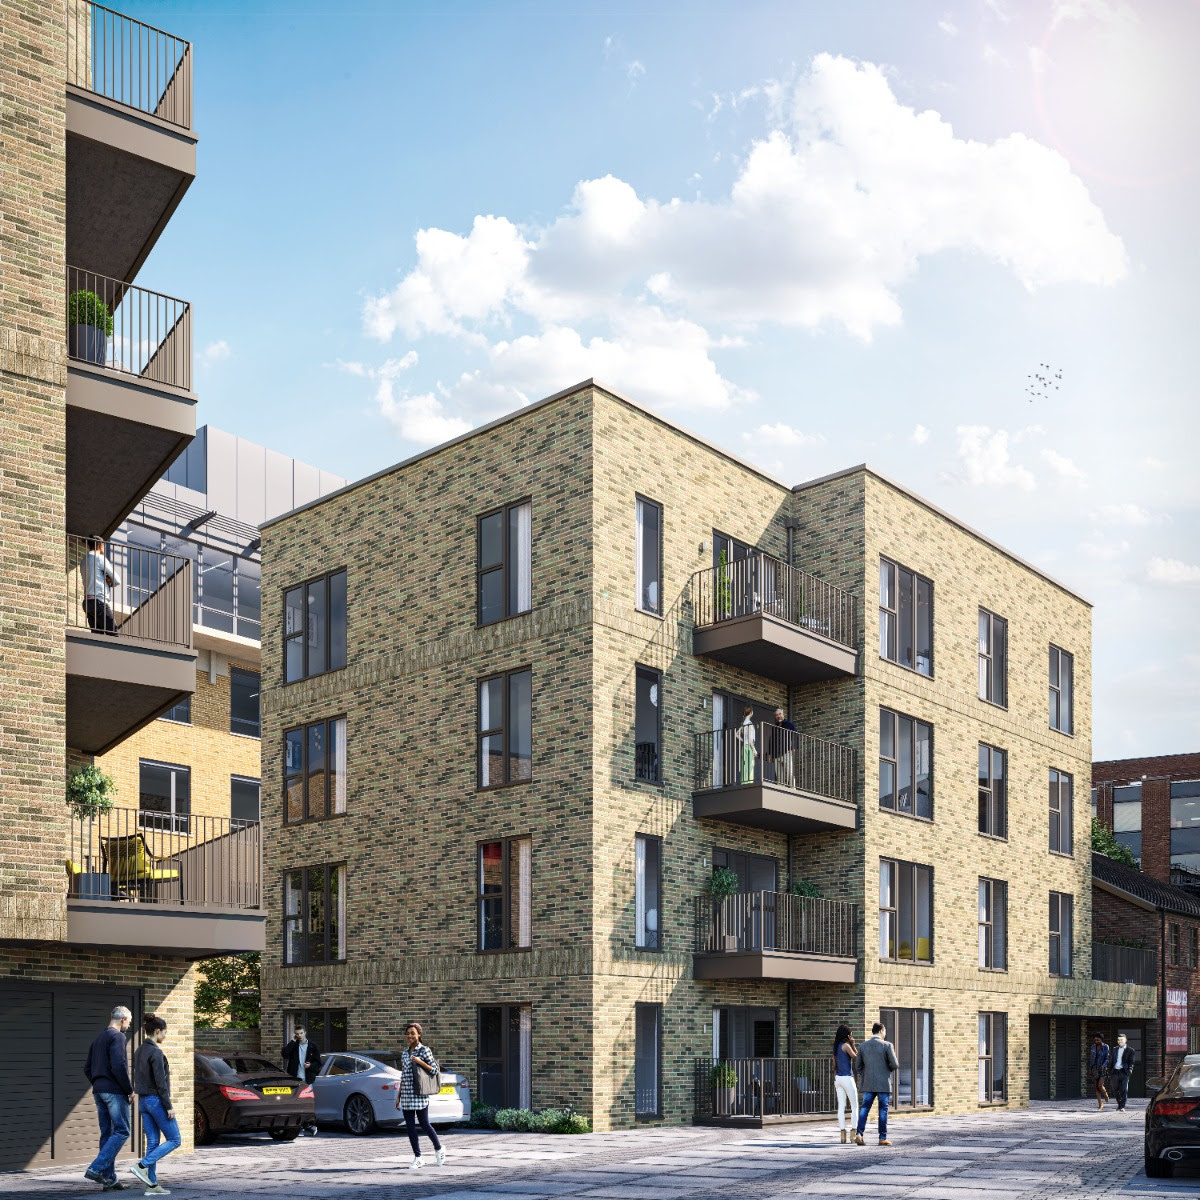 SHARED OWNERSHIP HOMES AT HISTORIC RANDALLS SITE PROVIDE AFFORDABLE ALTERNATIVE FOR RENTERS